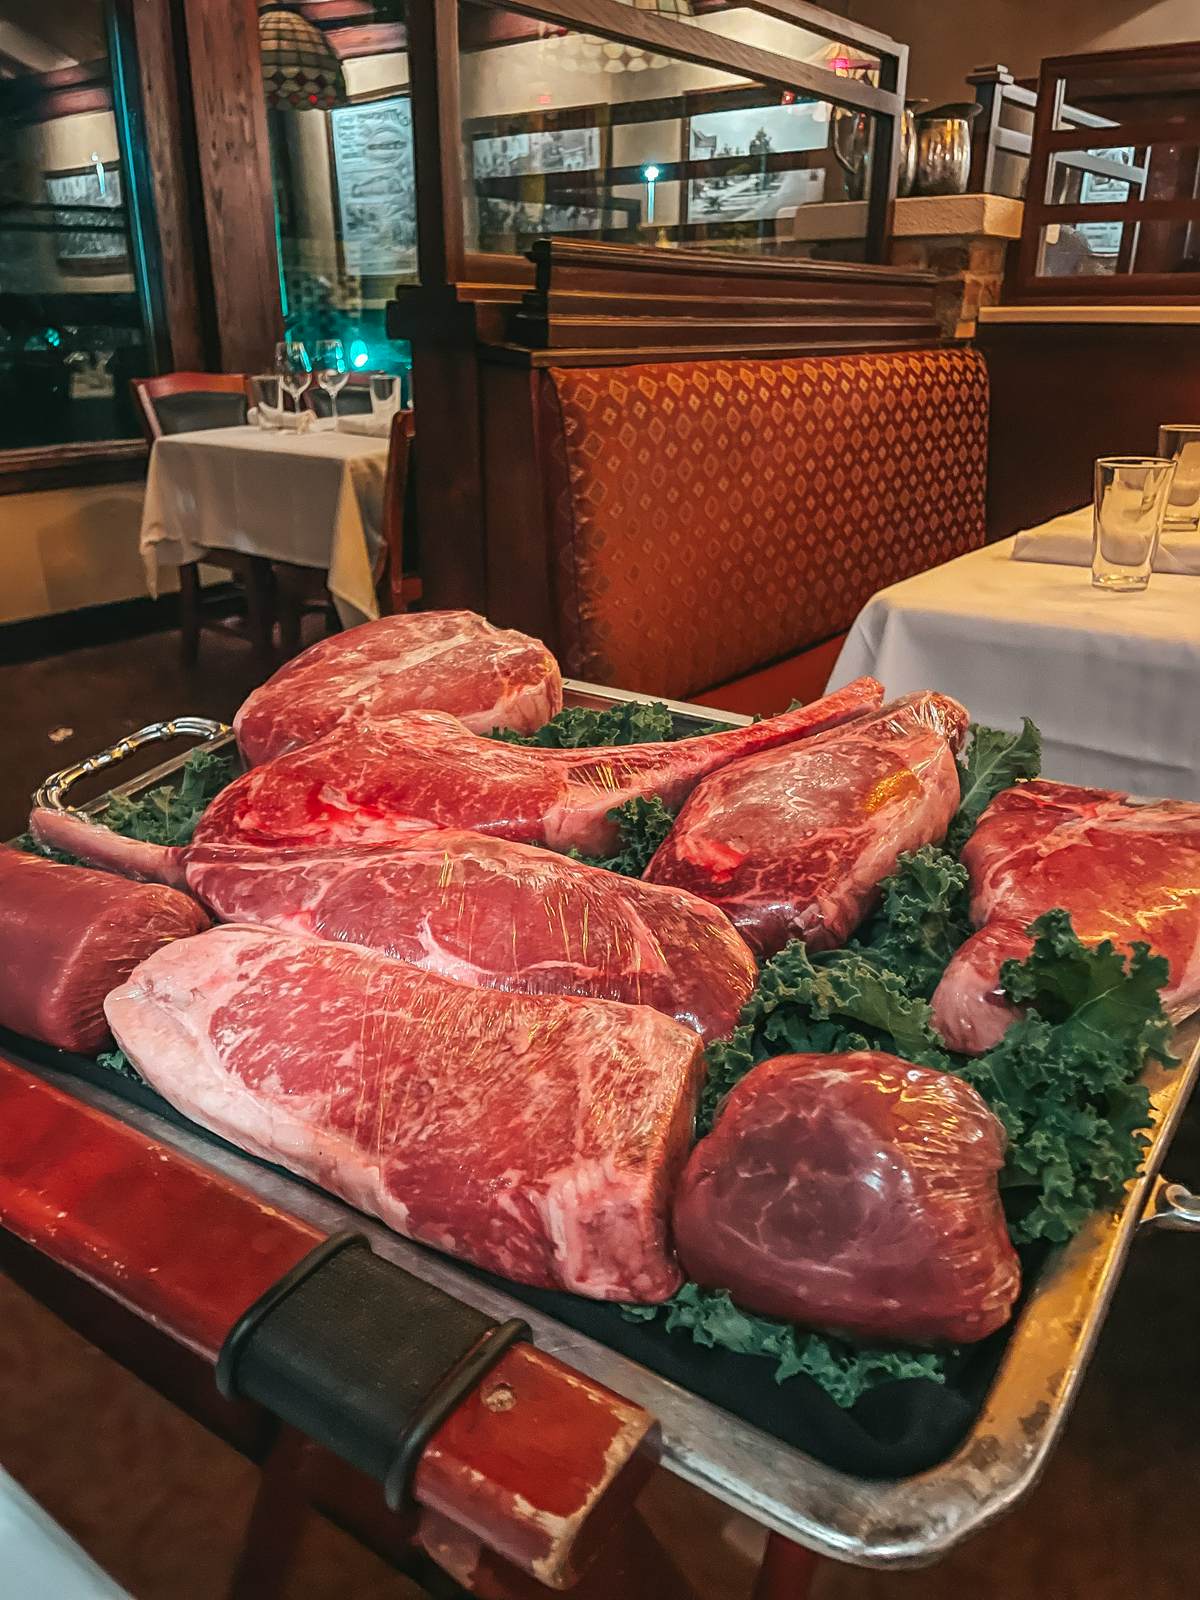 Tray of steak cuts at Charley's Steakhouse in Tampa